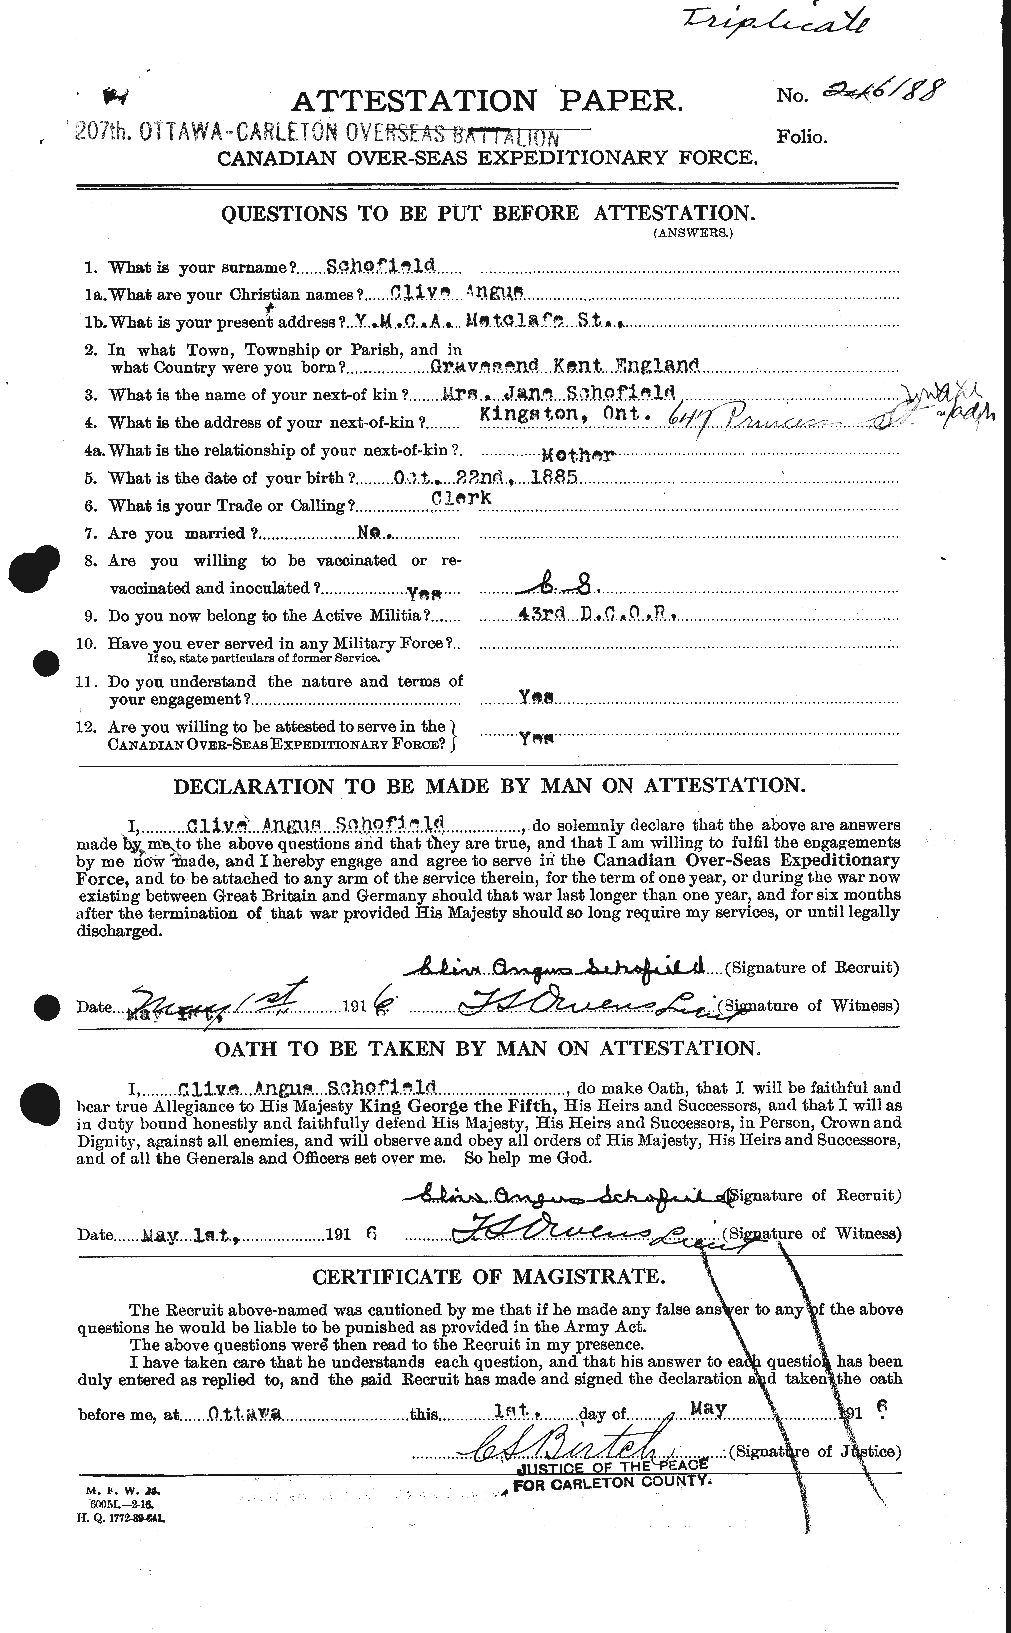 Personnel Records of the First World War - CEF 082213a